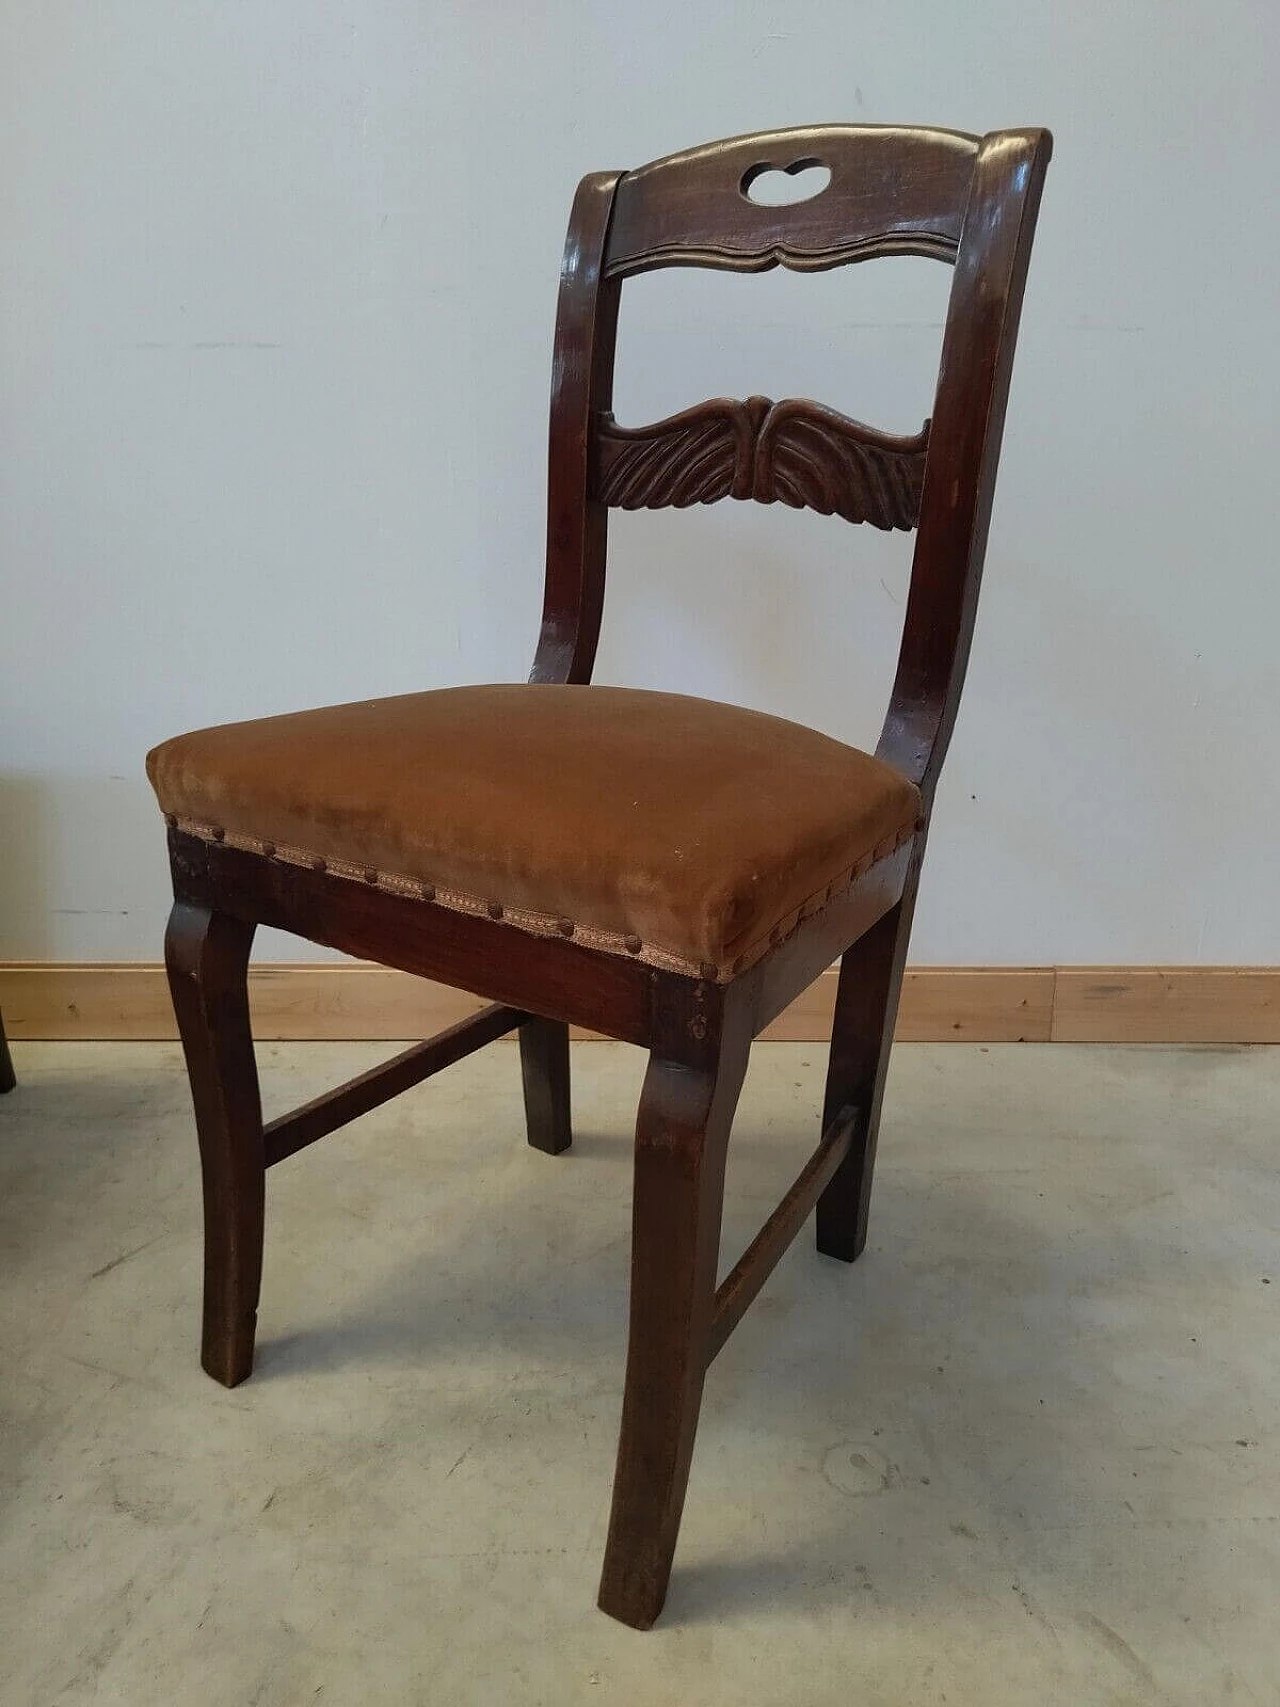 6 Empire-style walnut chairs, early 19th century 8